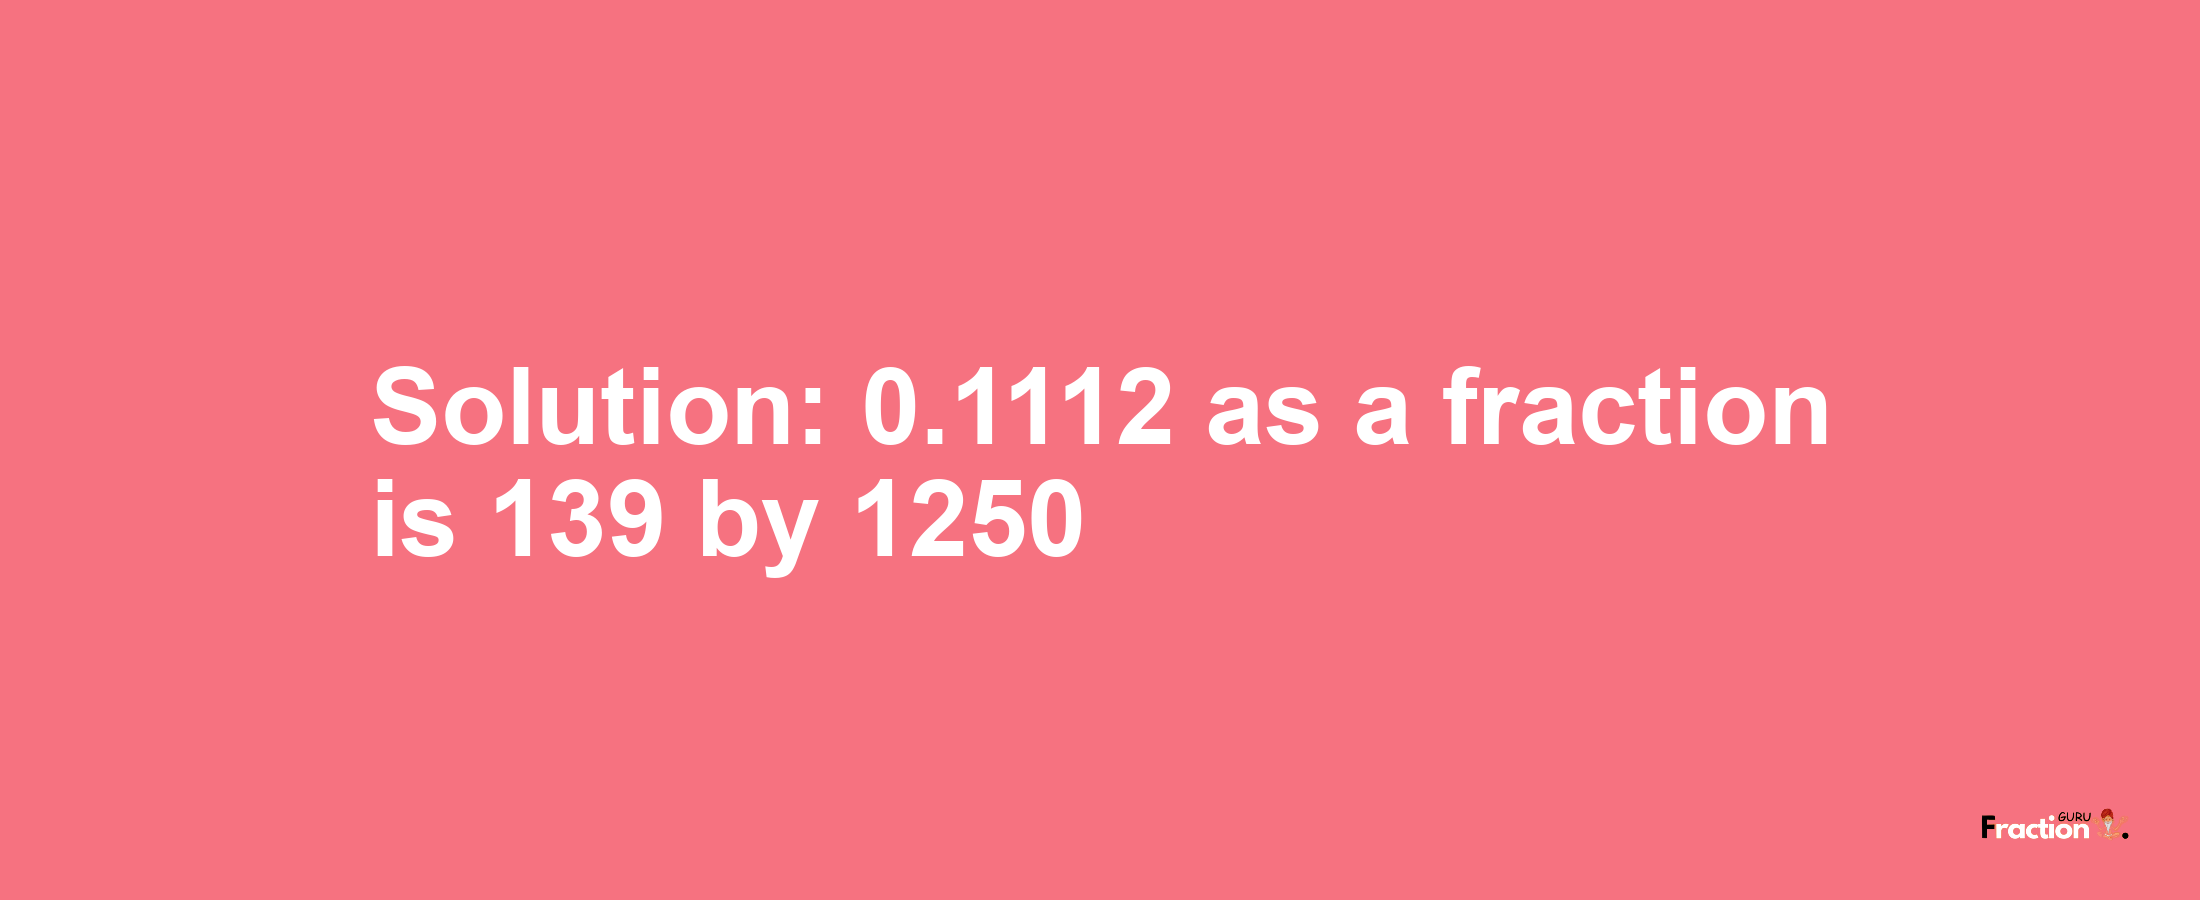 Solution:0.1112 as a fraction is 139/1250